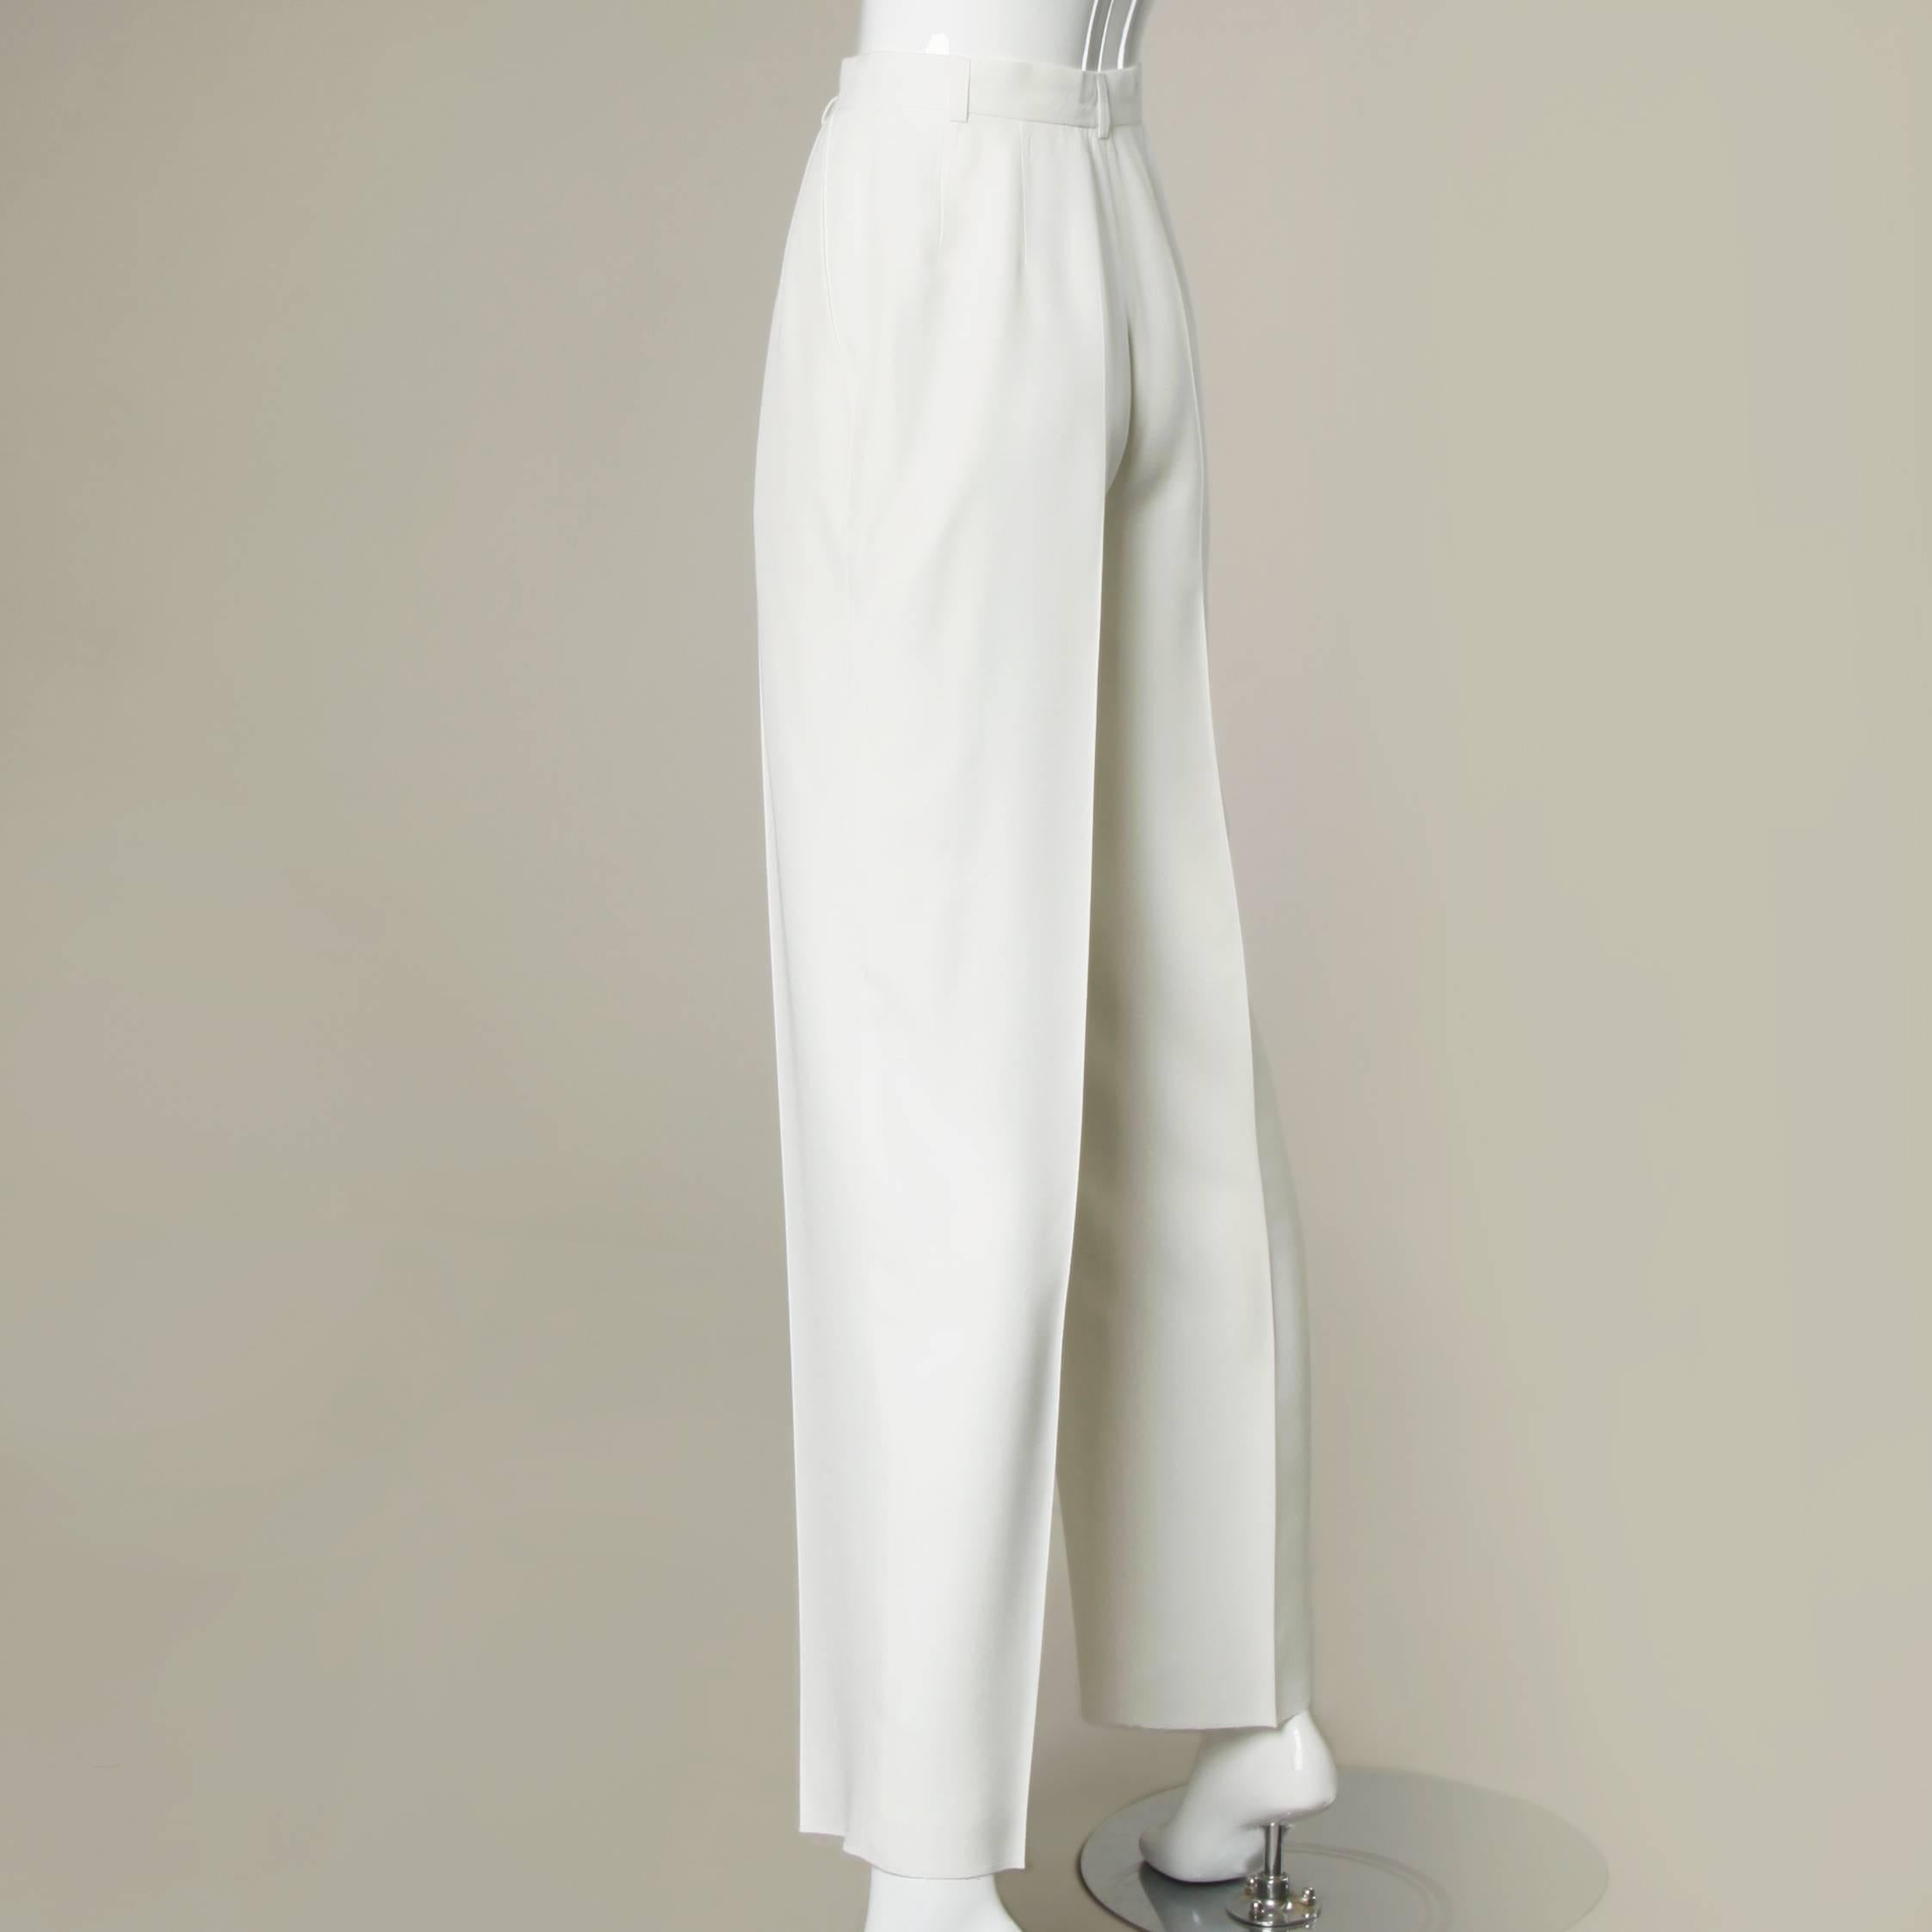 Sleek white high waisted trousers by Louis Feraud. Belt loops and pleated front.

Details:

Fully Lined
Side Pockets
Front Button and Zip Closure
Marked Size: US 4/ UK 8/ F 36/ D 34
Estimated Size: Small
Color: White
Fabric: 95% Rayon/ 5%